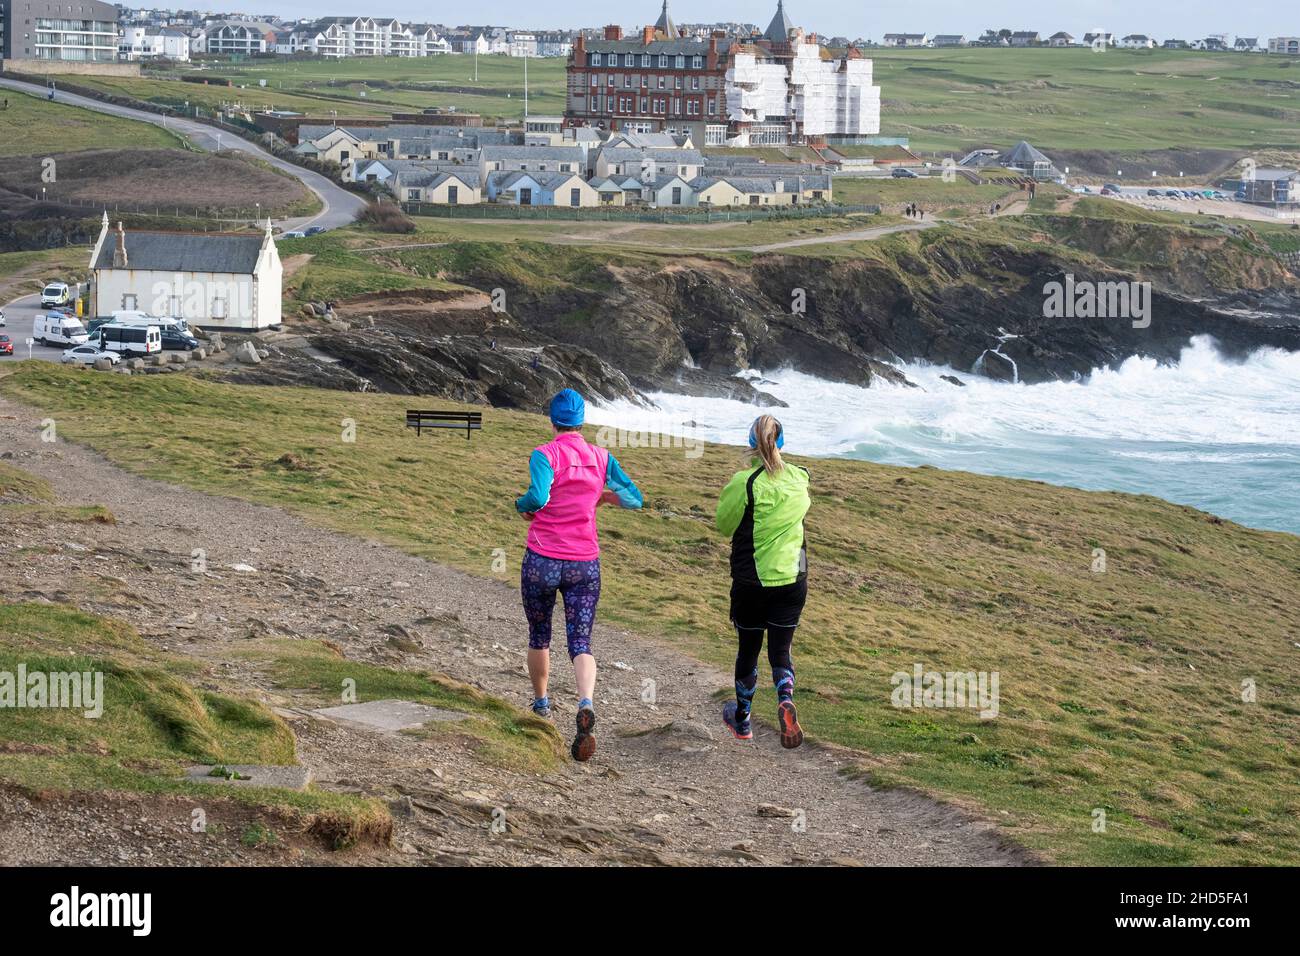 Two female friends running down a rough footpath on Towan Head in Newquay as part of their keep fit regime. Stock Photo